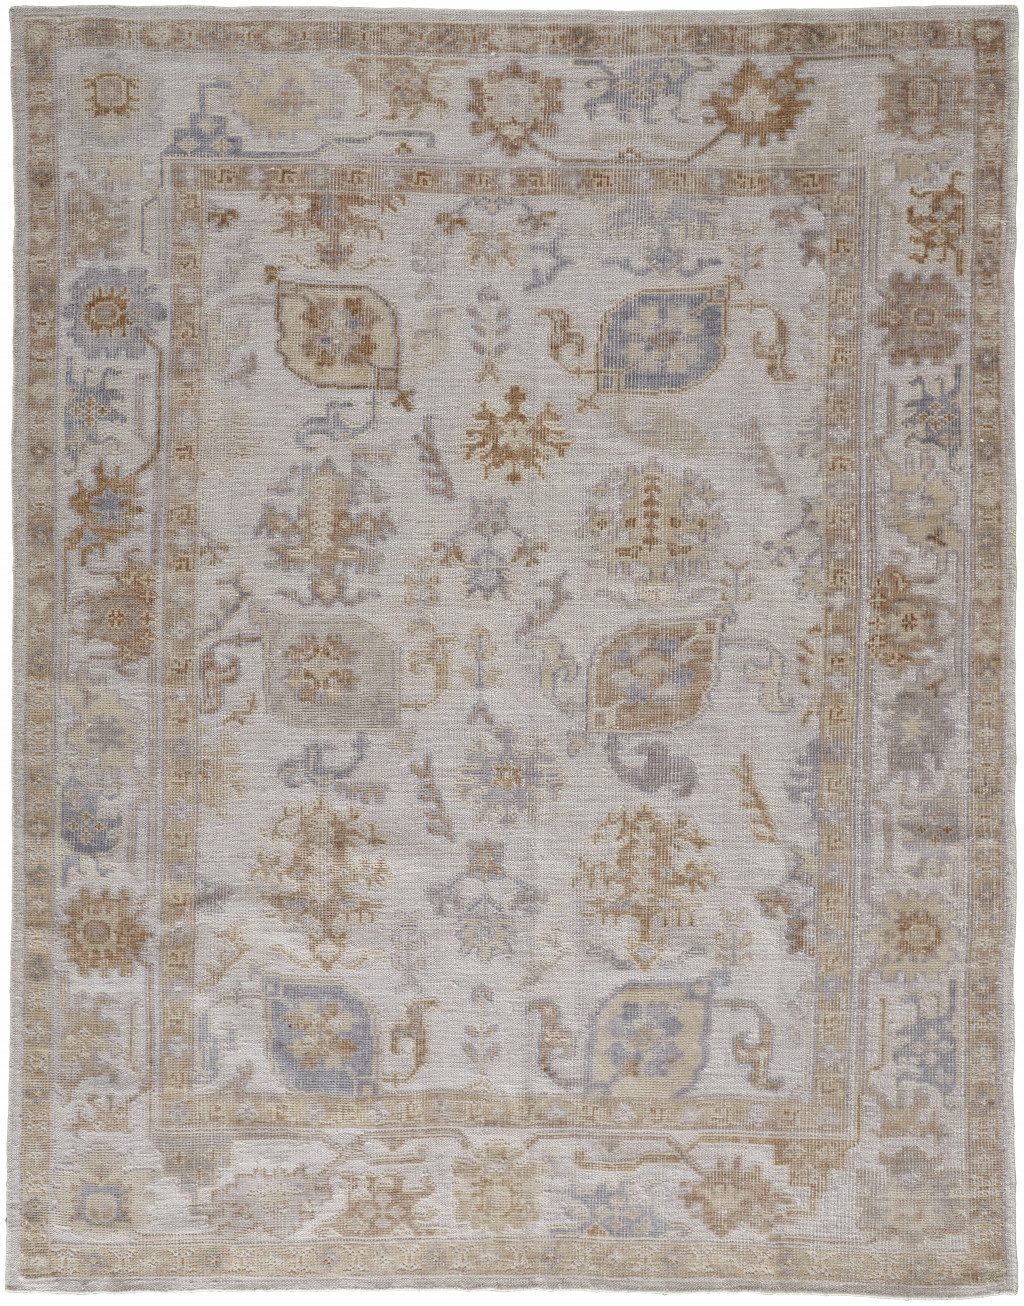 12' X 15' Ivory And Tan Floral Hand Knotted Stain Resistant Area Rug-514982-1